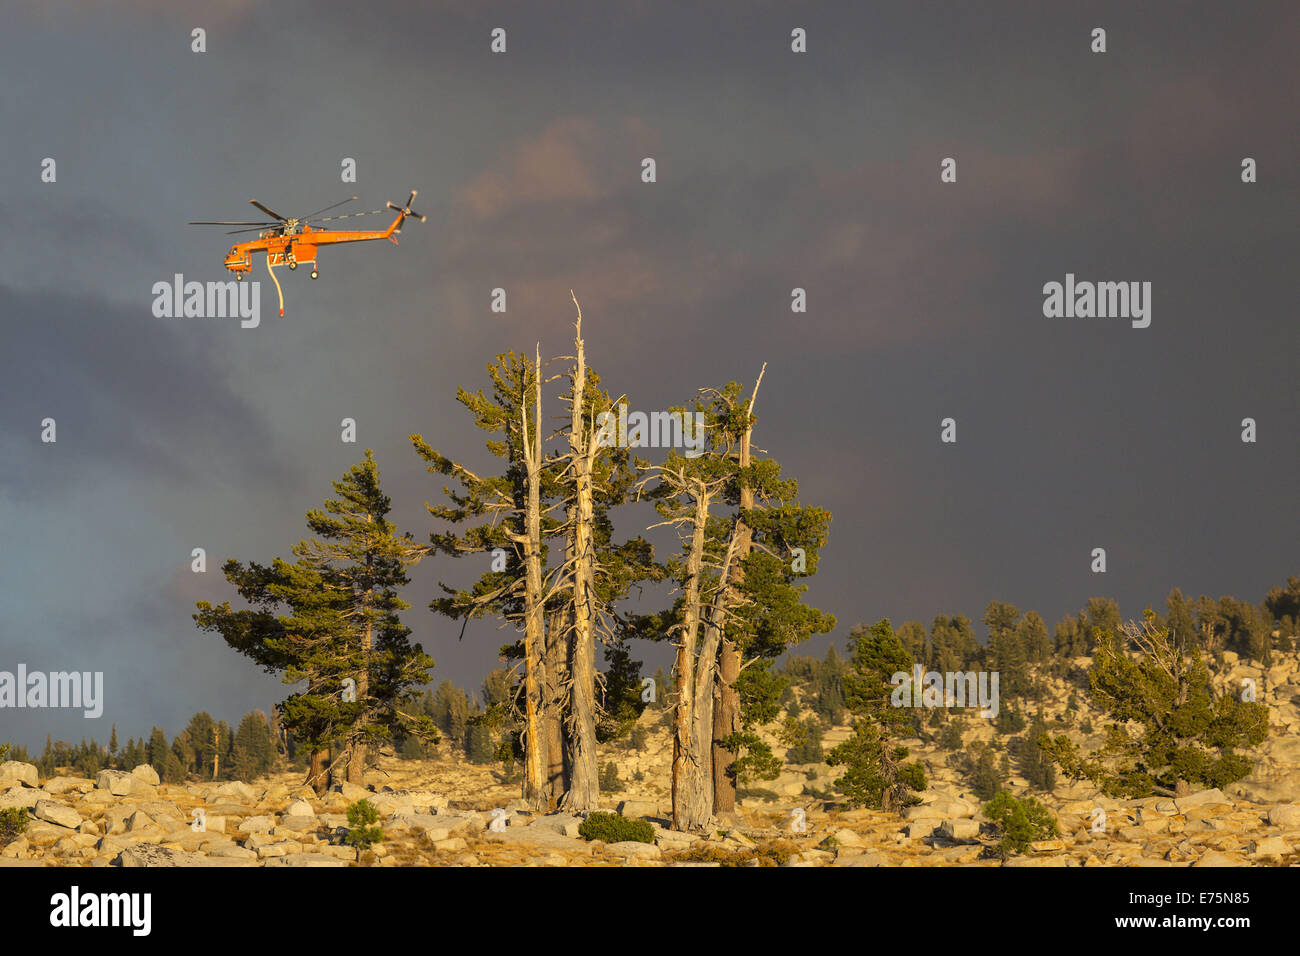 Yosemite National Park, California, USA. 7th Sep, 2014. September 7, 2014.An Aircrane helicopter, used to battle the Meadow Fire in Yosemite National Park, is seen from the Olmsted Point area along Tioga Pass Road/Highway 120. The wildfire is located east of Little Yosemite Valley and is approximately 700 acres. Approximately 100 people were evacuated by helicopter from the areas around Half Dome and Little Yosemite Valley. Credit:  Tracy Barbutes/ZUMA Wire/Alamy Live News Stock Photo